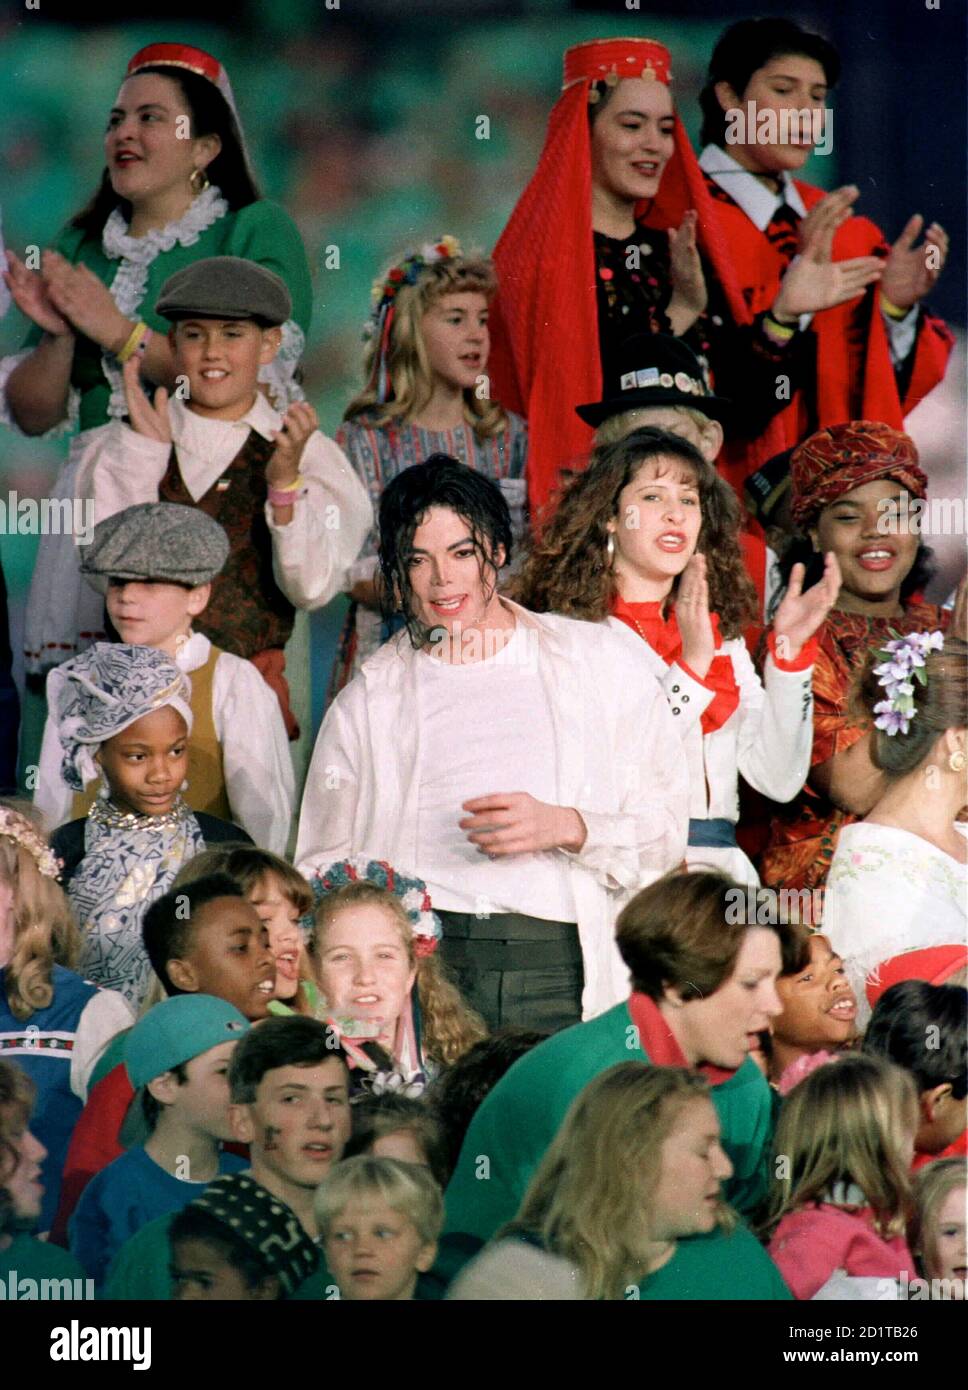 Michael Jackson performs during the halftime show at the NFL's Super Bowl  XXVII in Pasadena, California, in this January 31, 1993 file photo. Michael  Jackson's family gathered at his parents' suburban Los